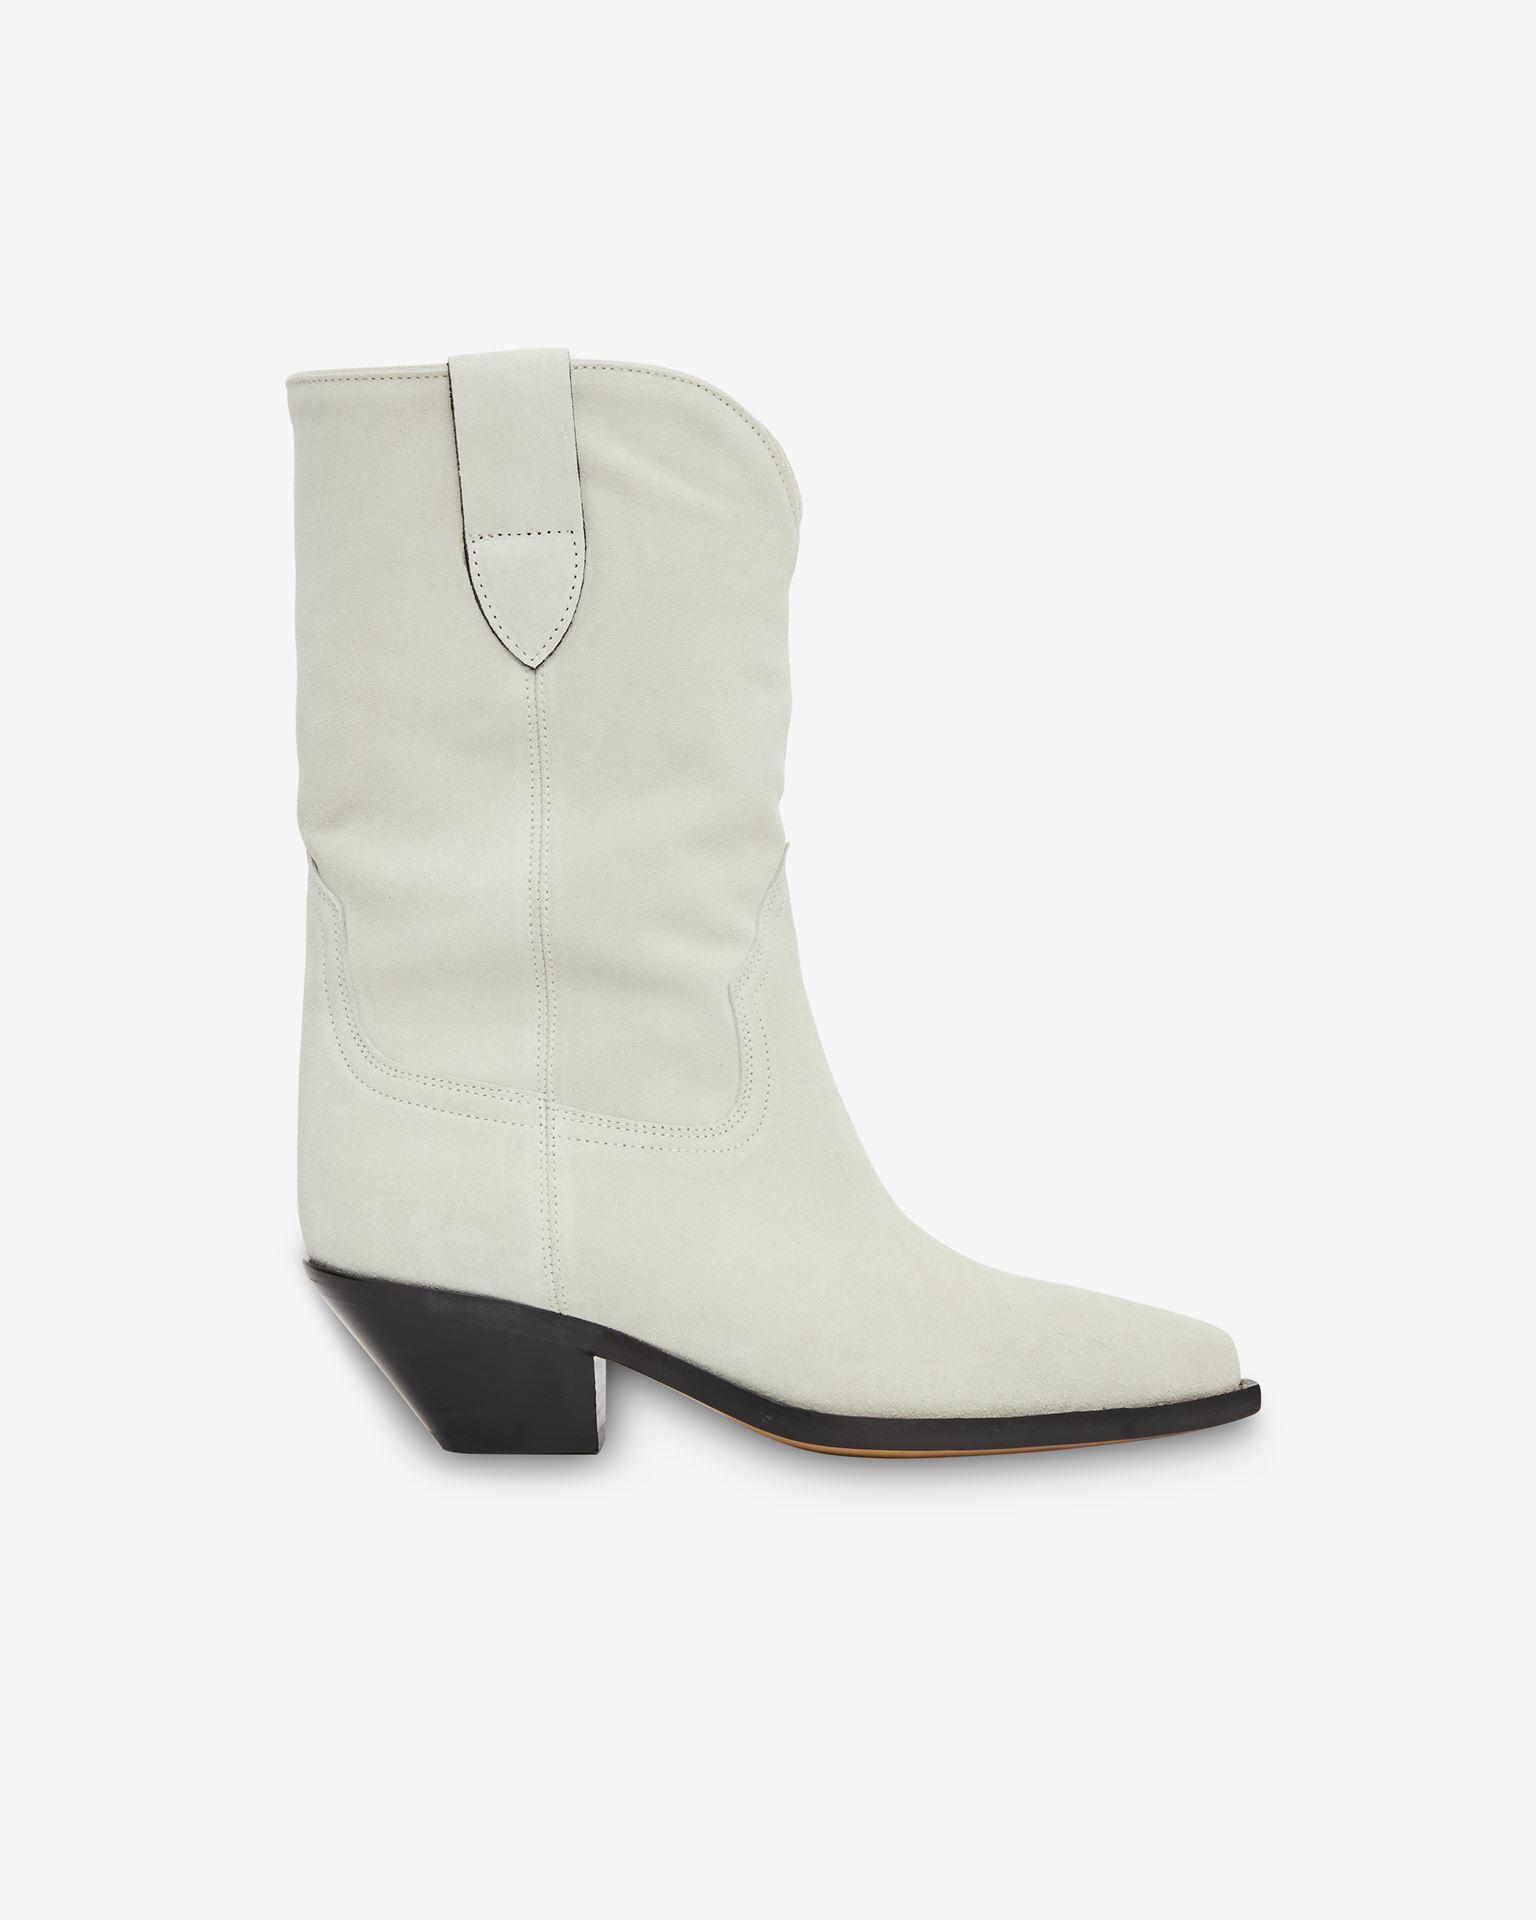 Isabel Marant Dahope Suede Cowboy Boots in White | Lyst